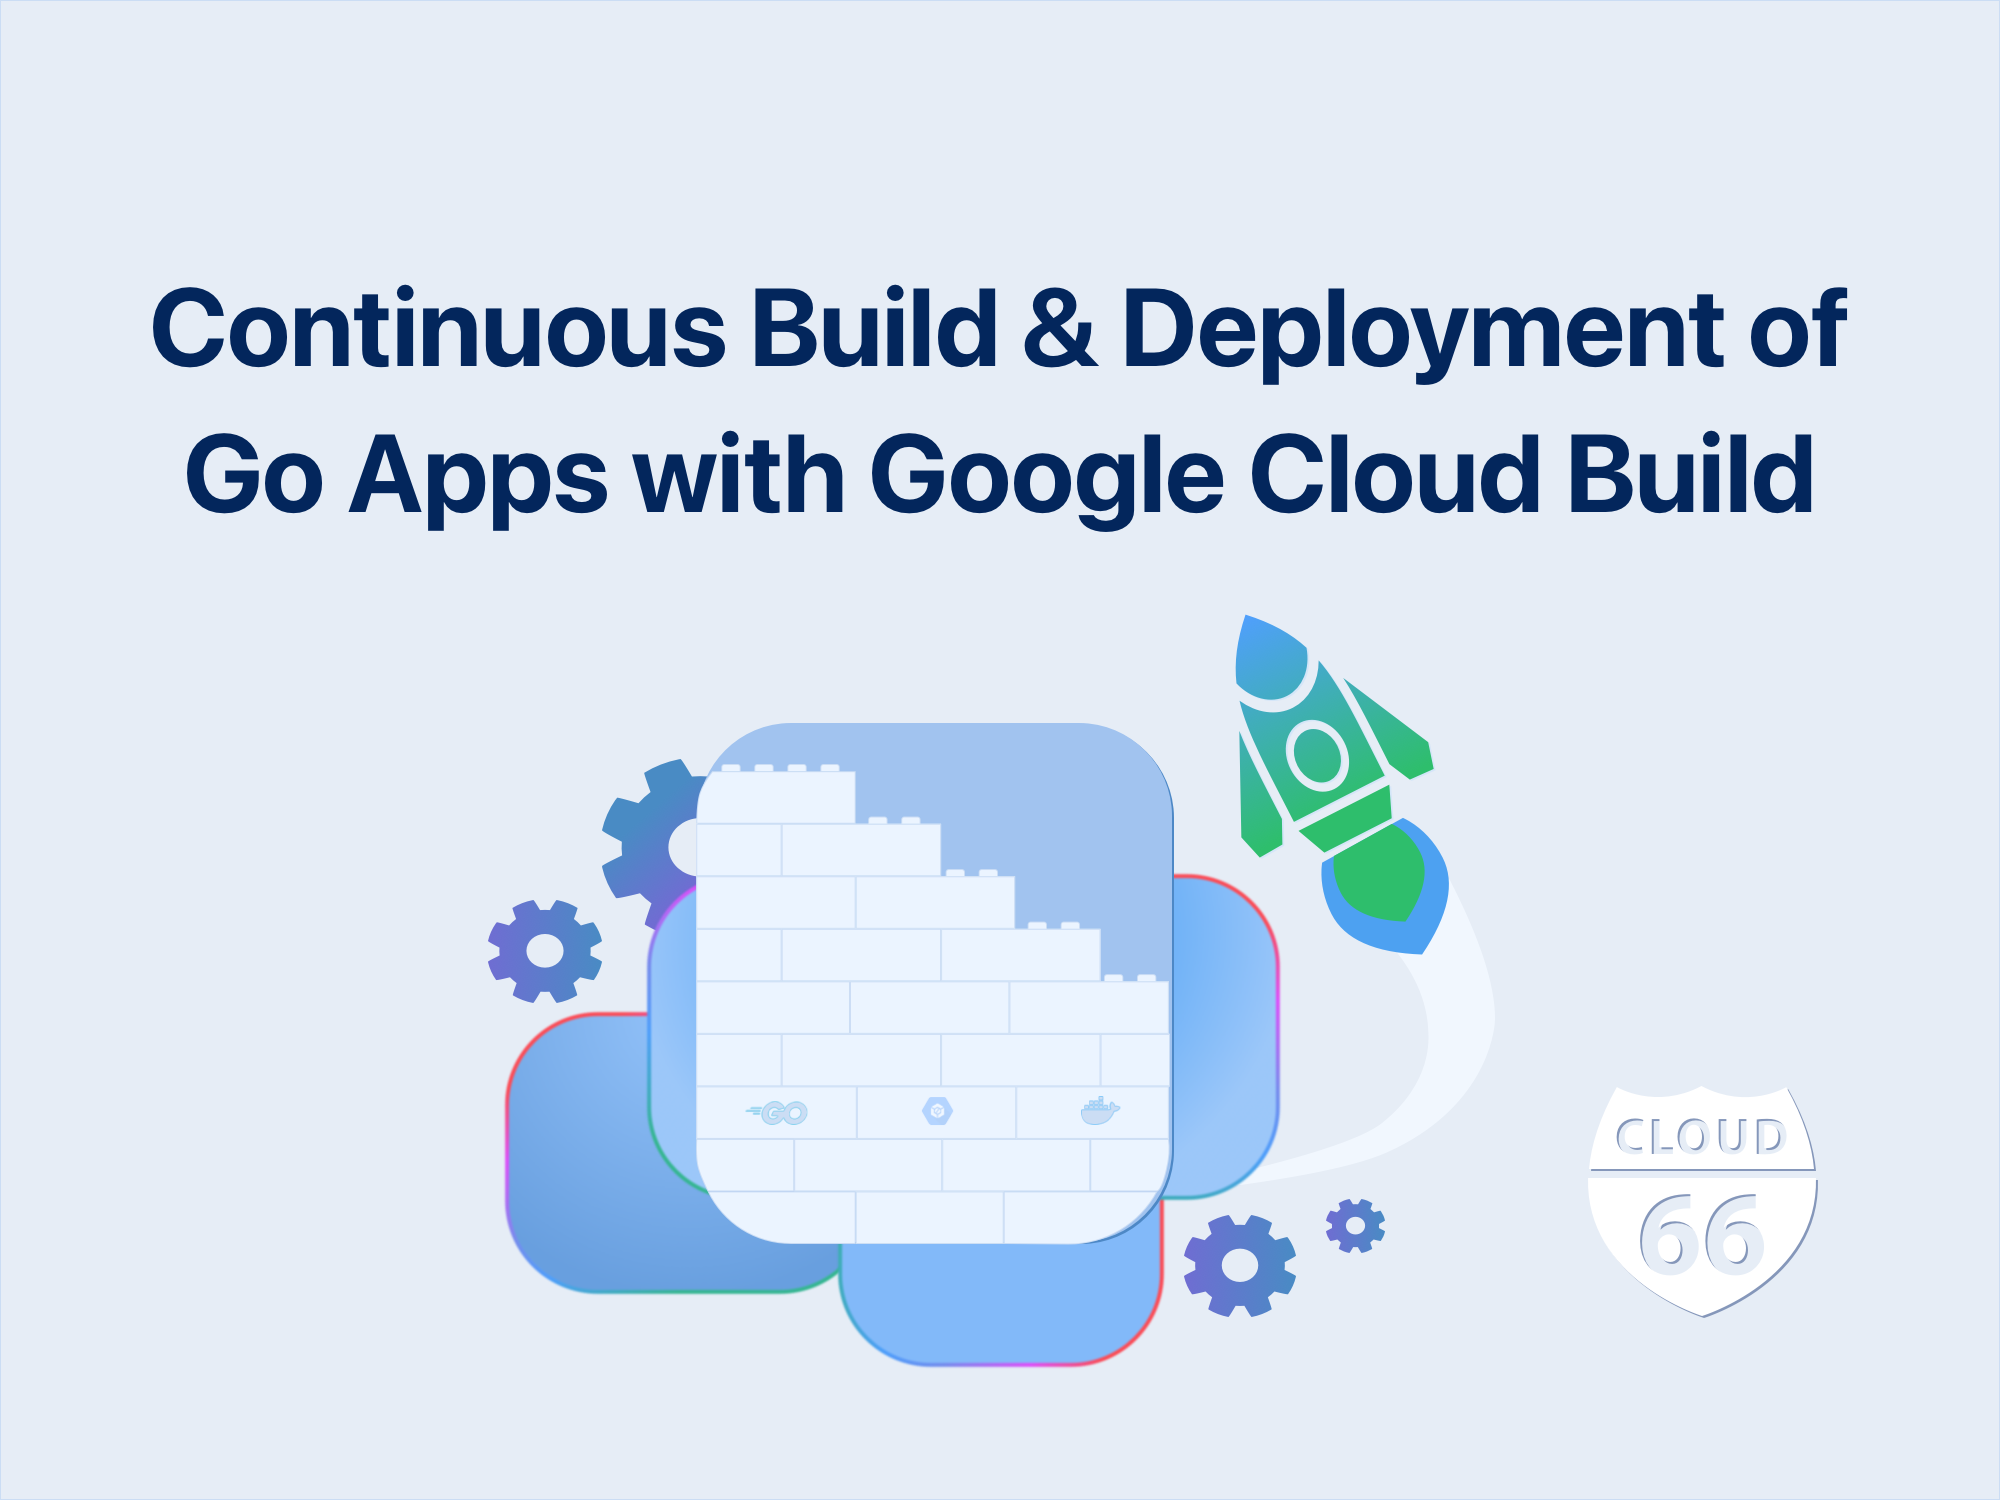 Continuous Build and Deployment of Go Applications with Google Cloud Build